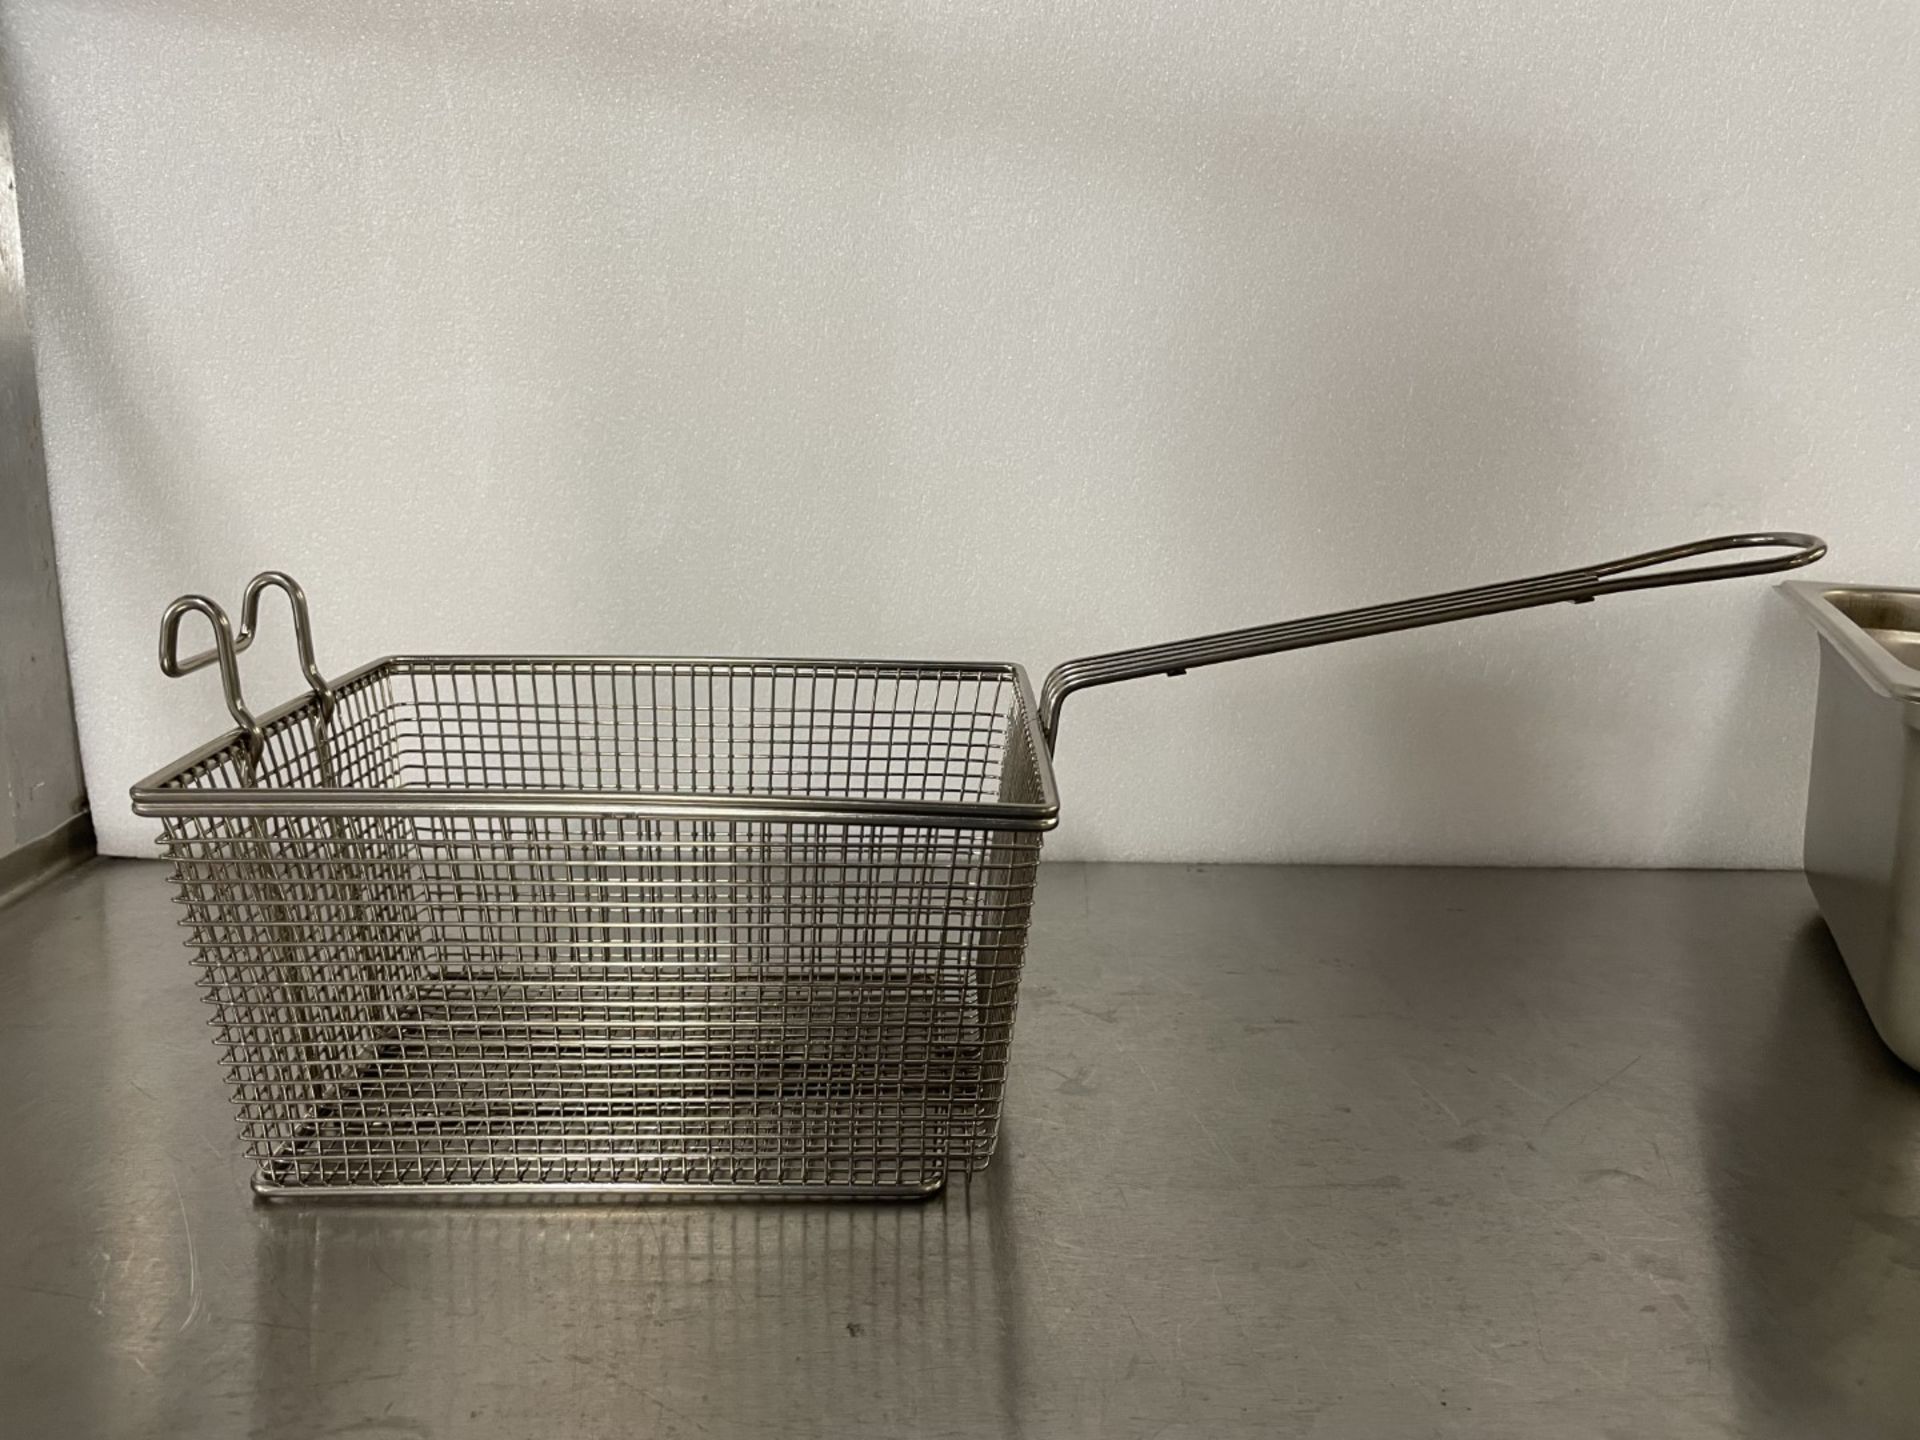 Stainless Steel Wash Pan, with Basket - Image 2 of 3